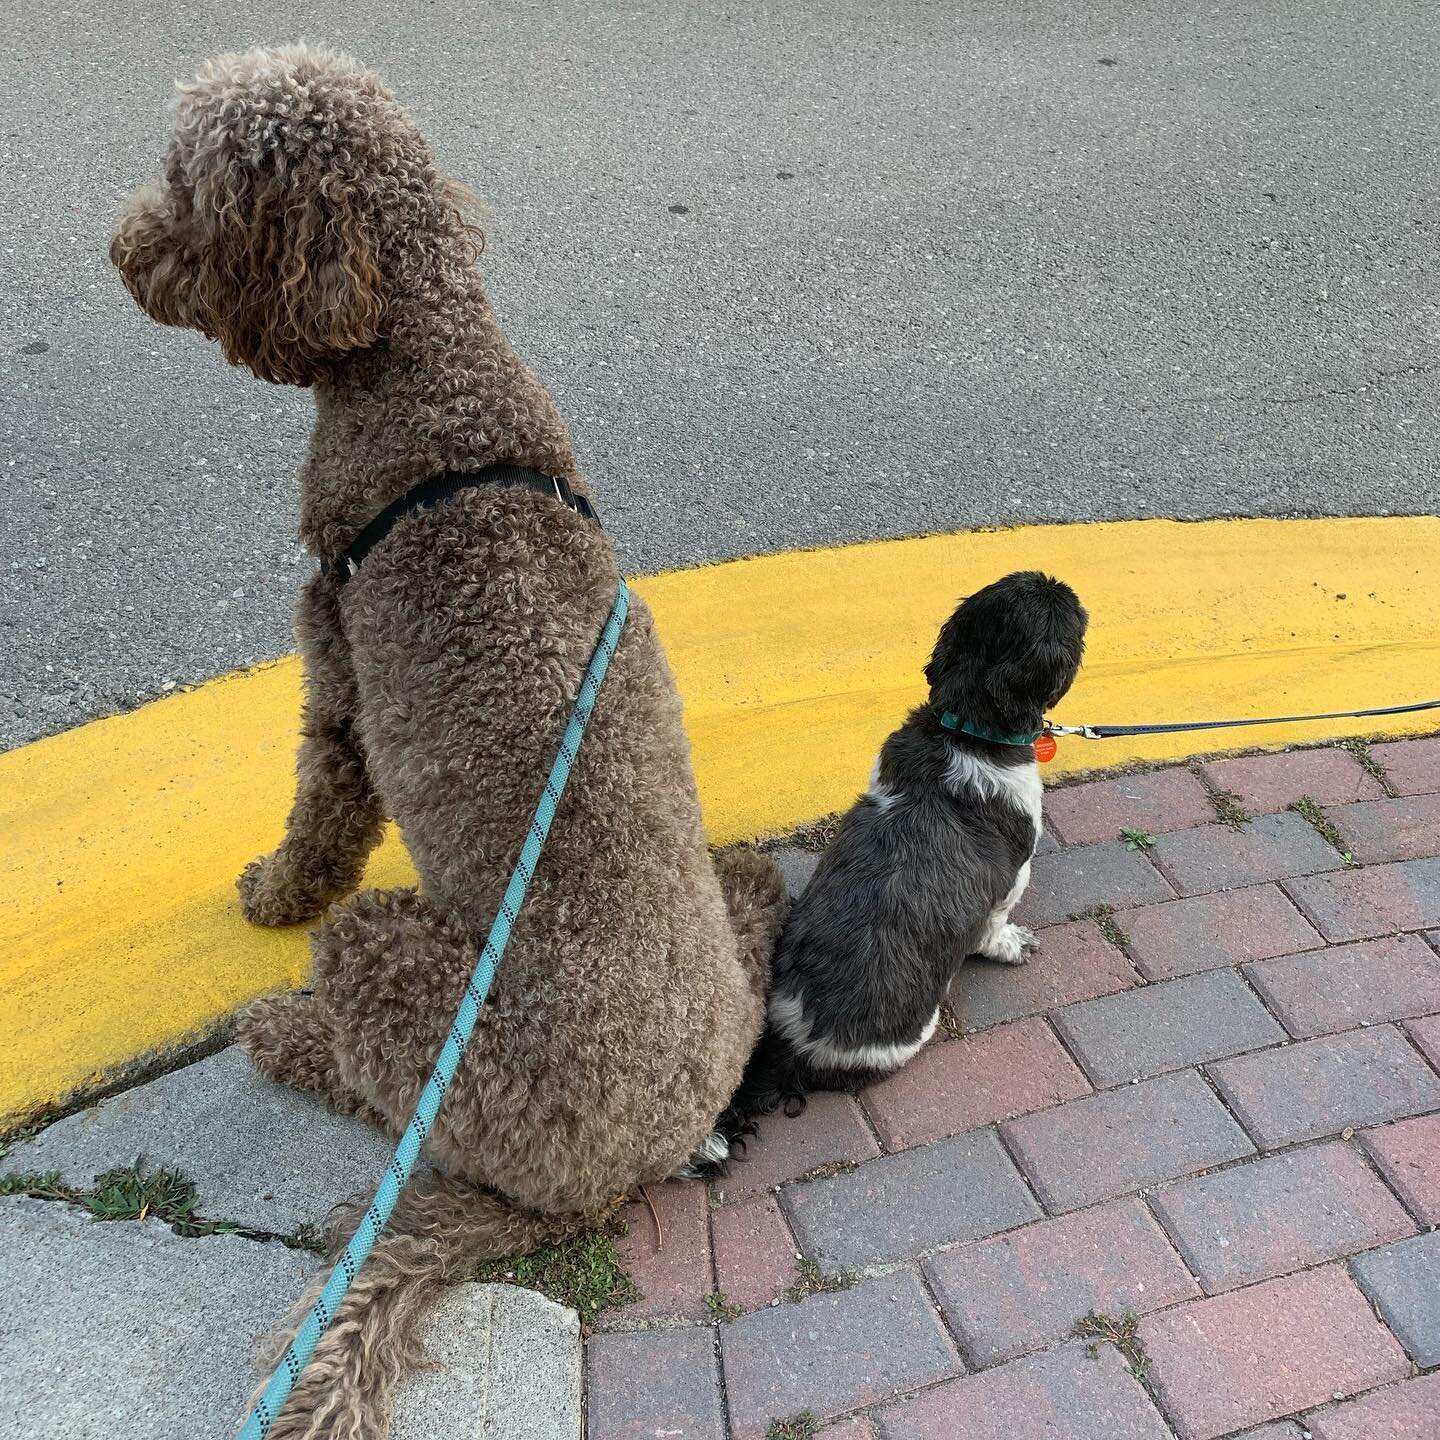 Everyone&rsquo;s back to work today, but looks like Harley and Bear needed some support to stay up 😴🐶
#thepack #longweekend #friends #sizedoesntmatter #shihtzu #labradoodle #puppylove #onguard #dogwalking #bff